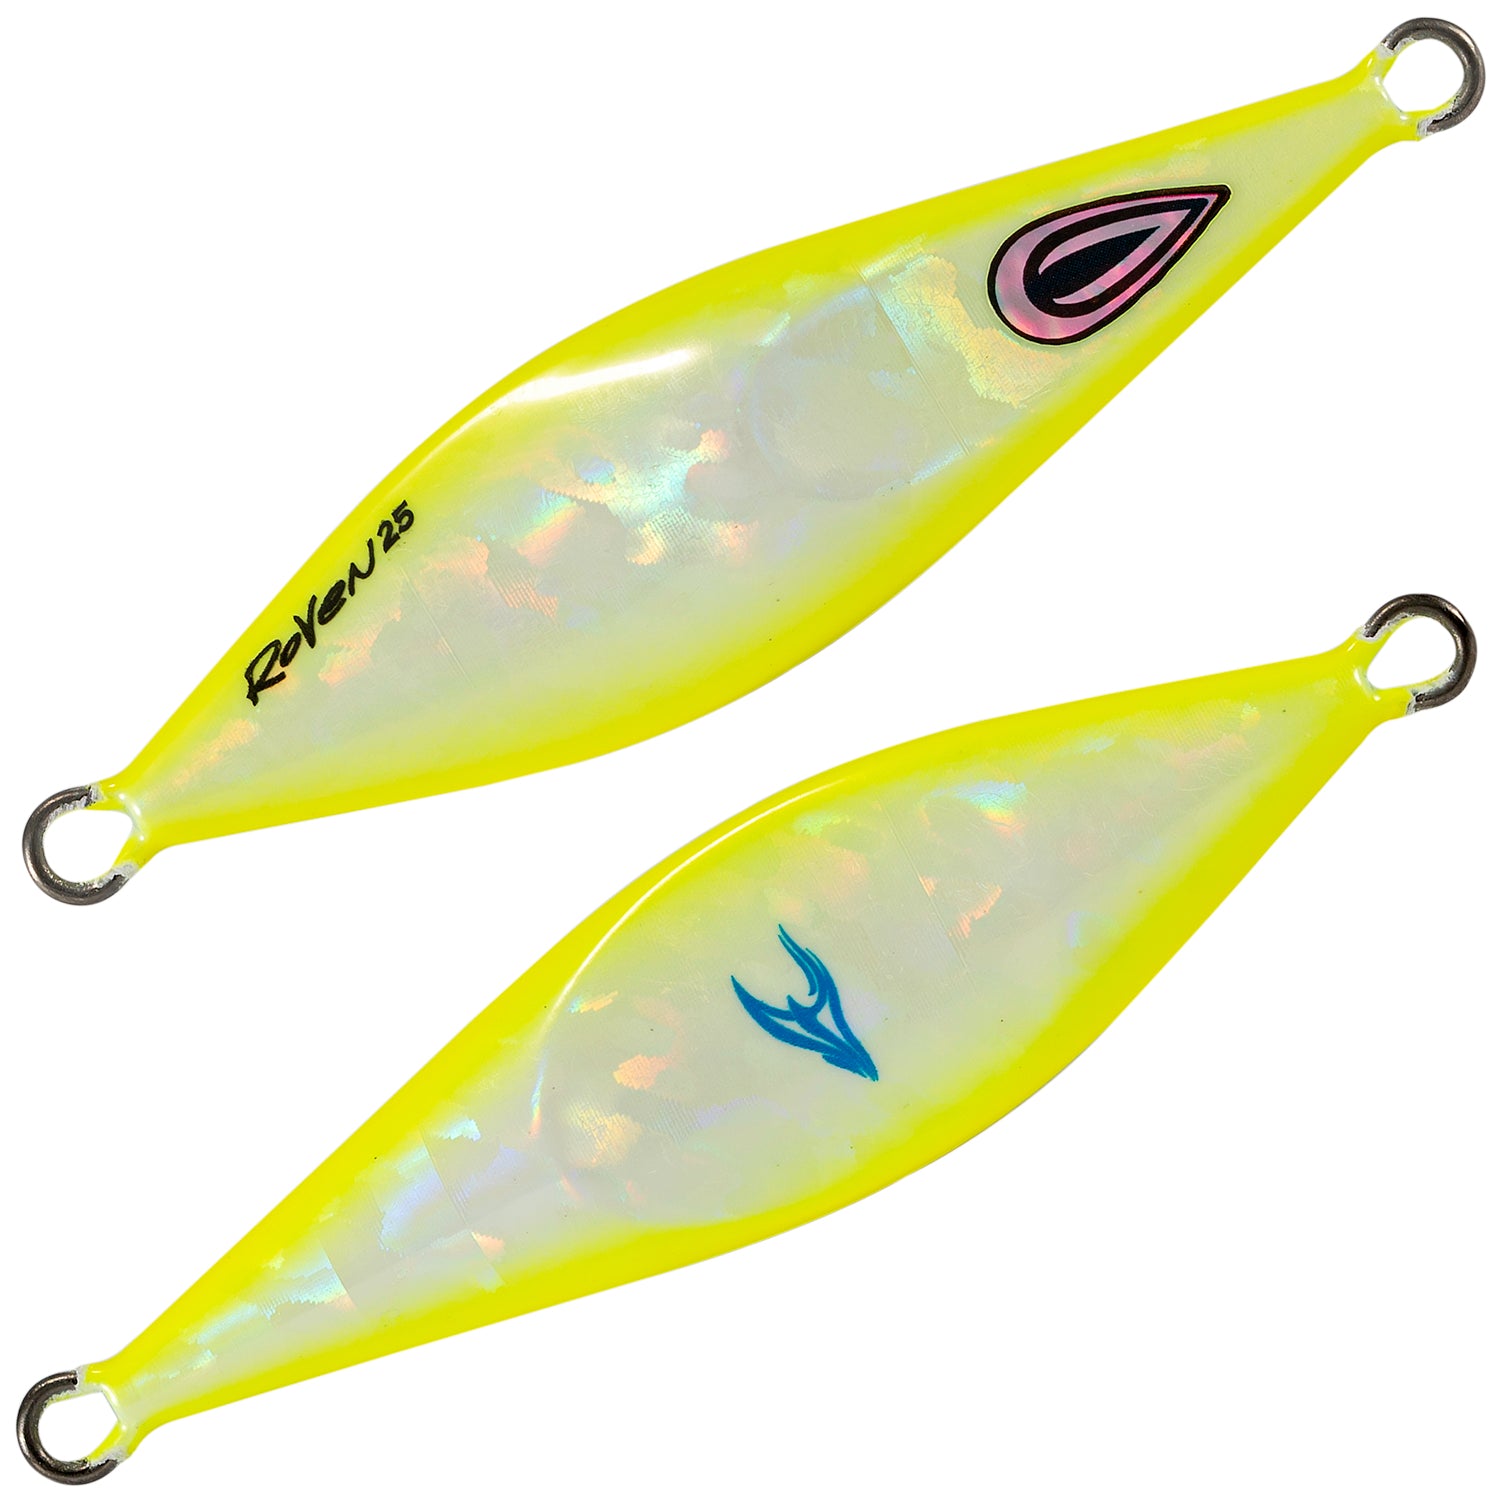 Oceans Legacy Roven Jig Rigged 10g 7